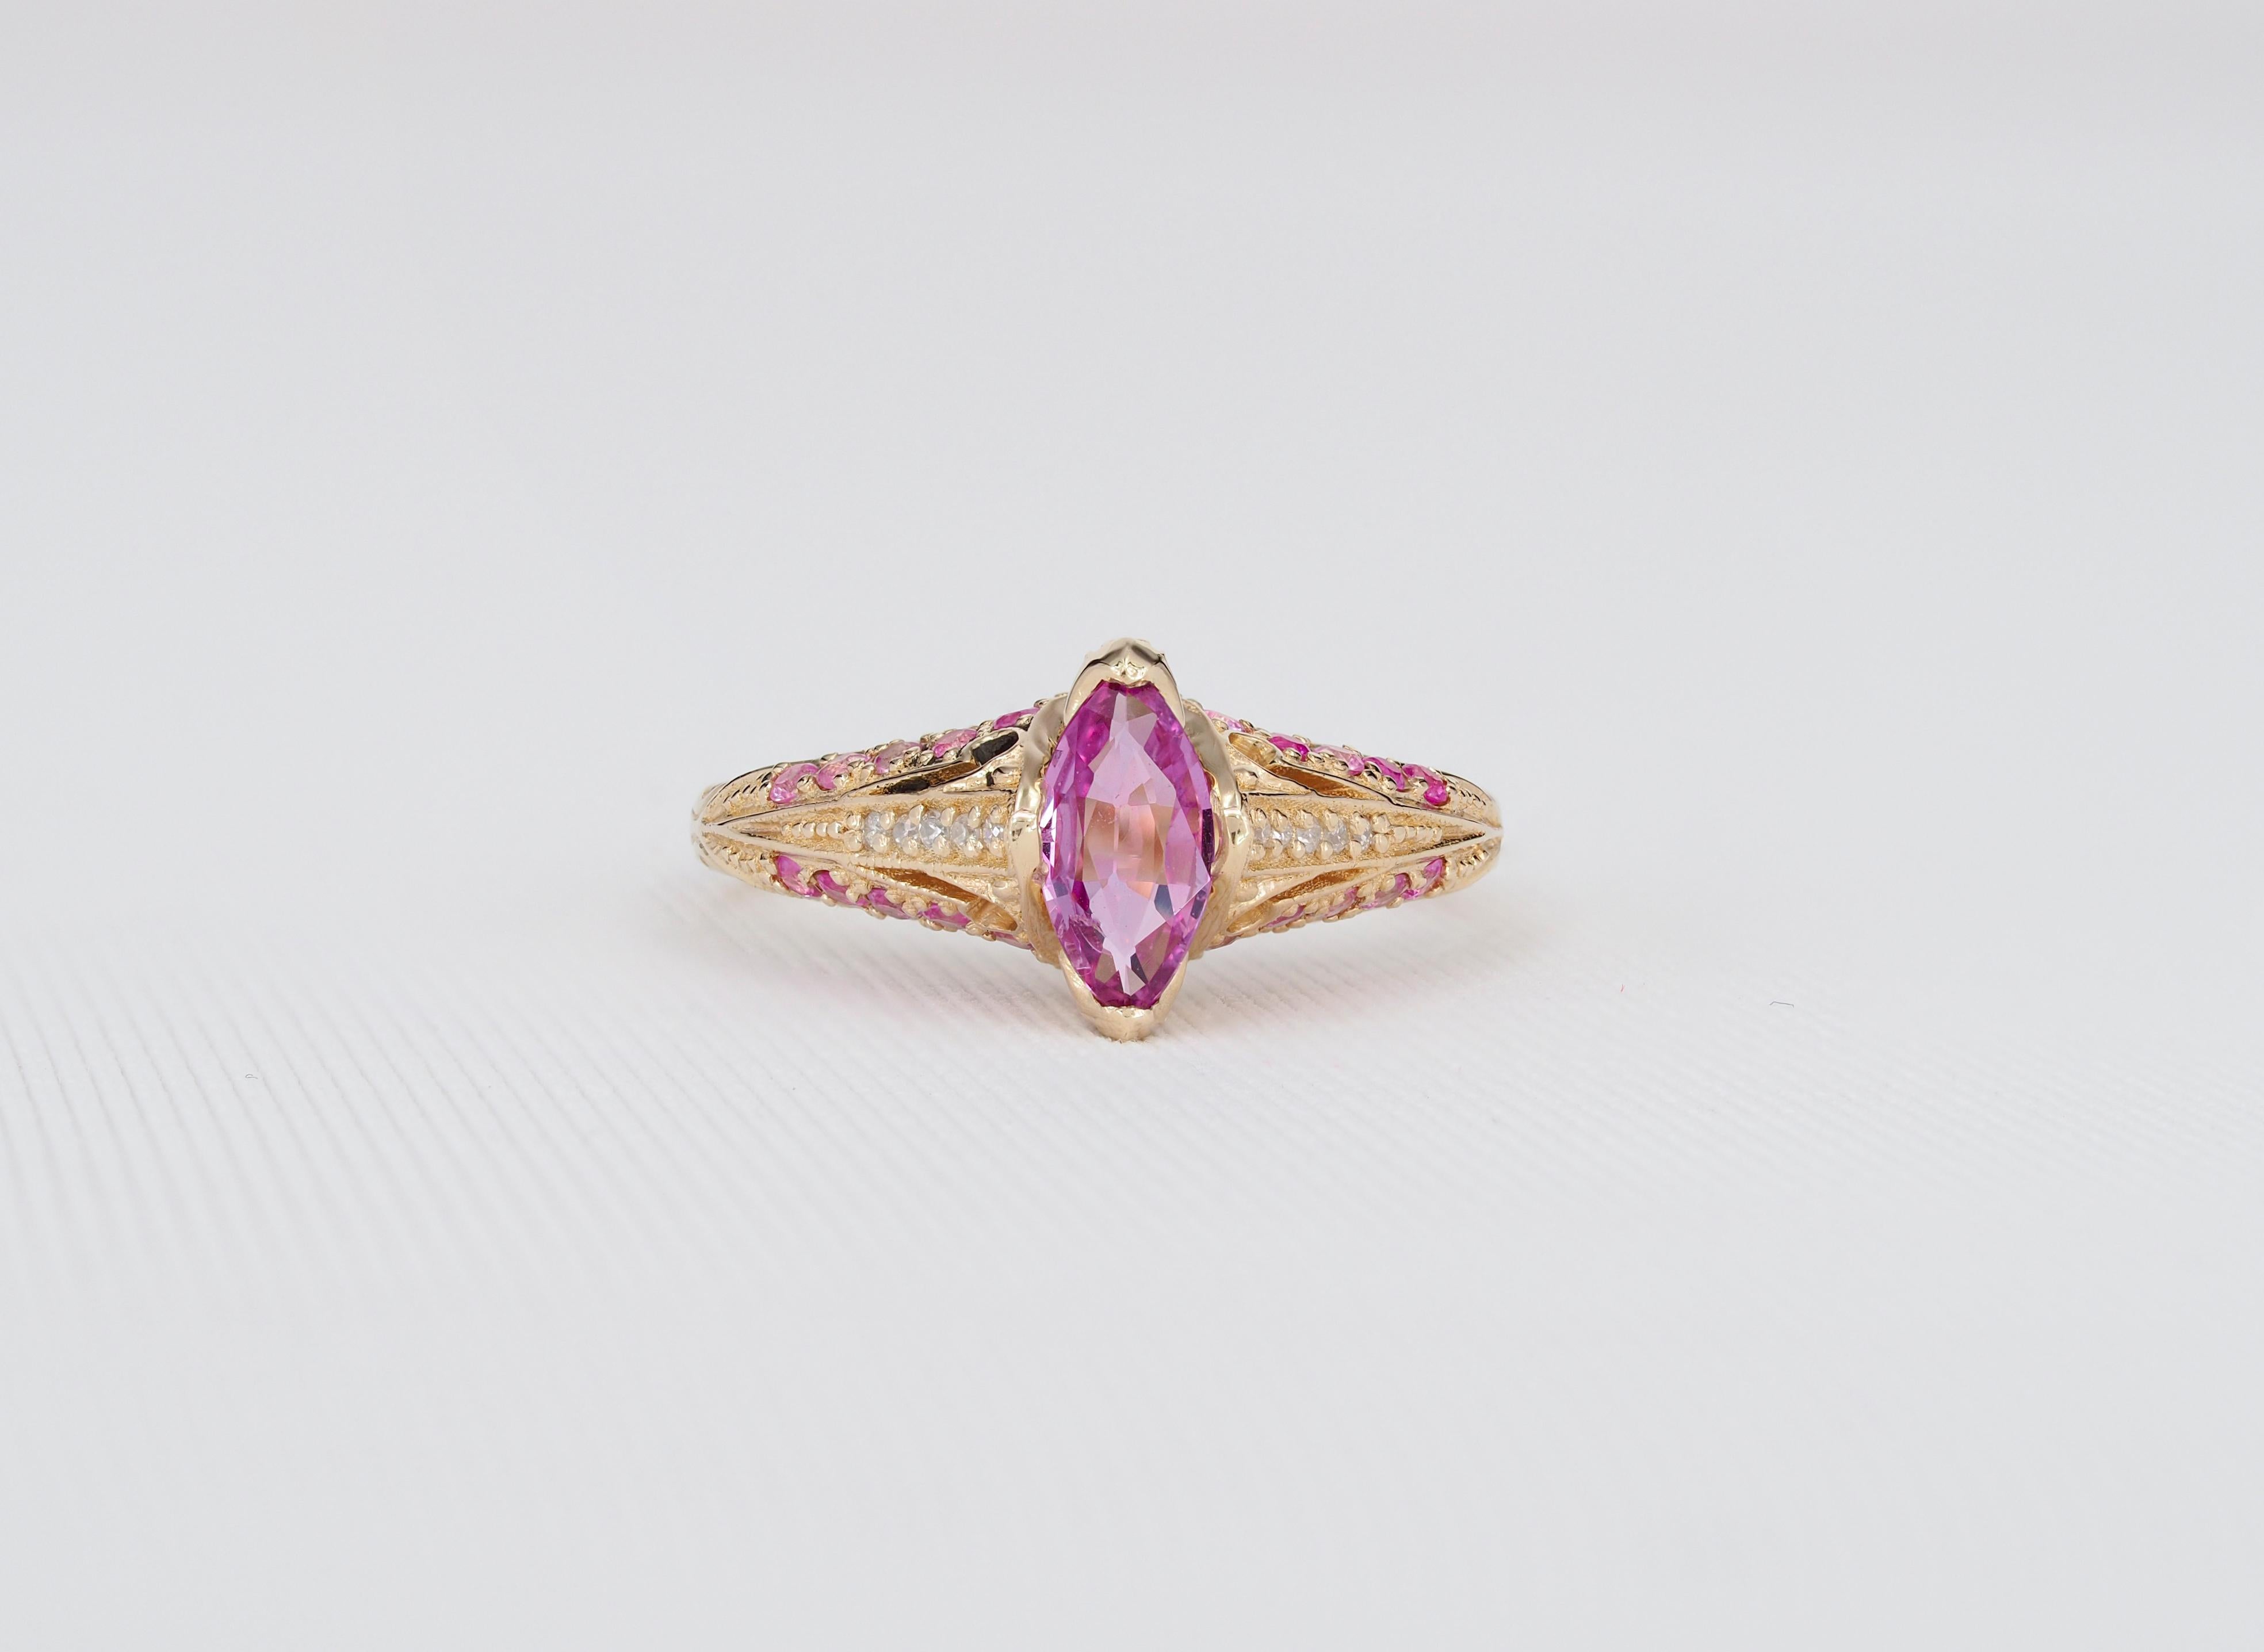 For Sale:  14k gold ring with pink sapphire. Marquise sapphire ring 2